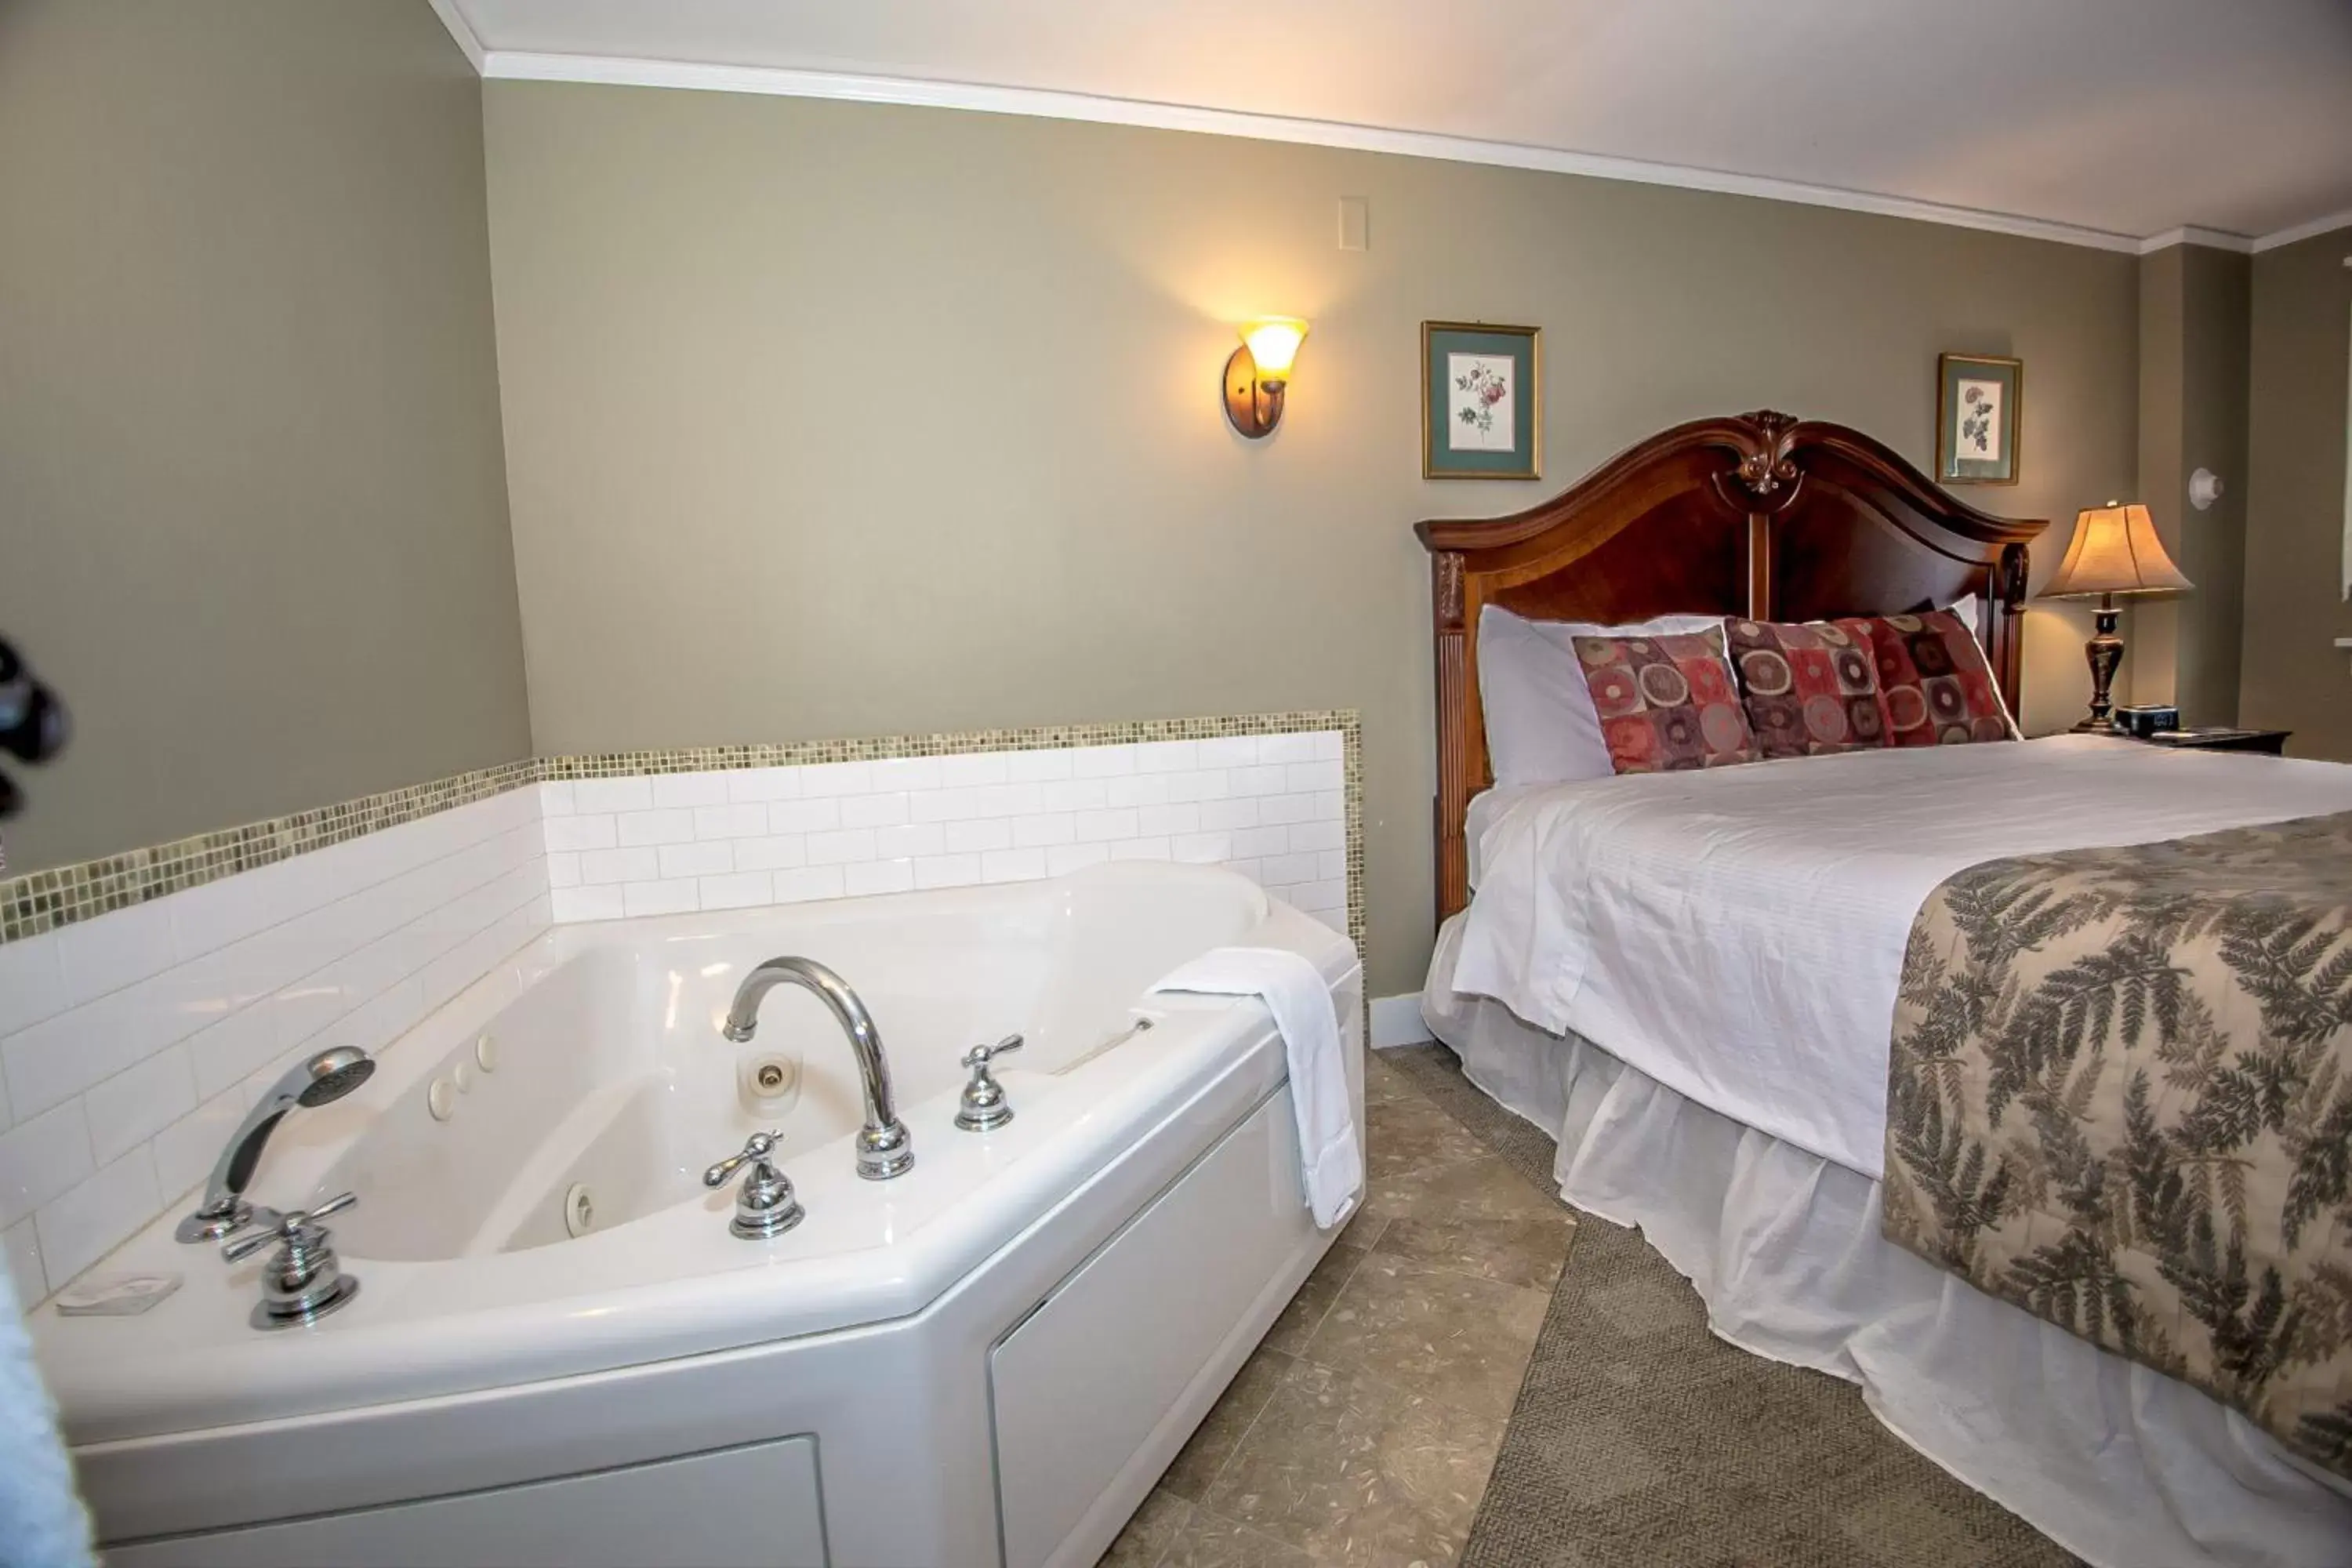 Bedroom in Cranmore Inn and Suites, a North Conway boutique hotel